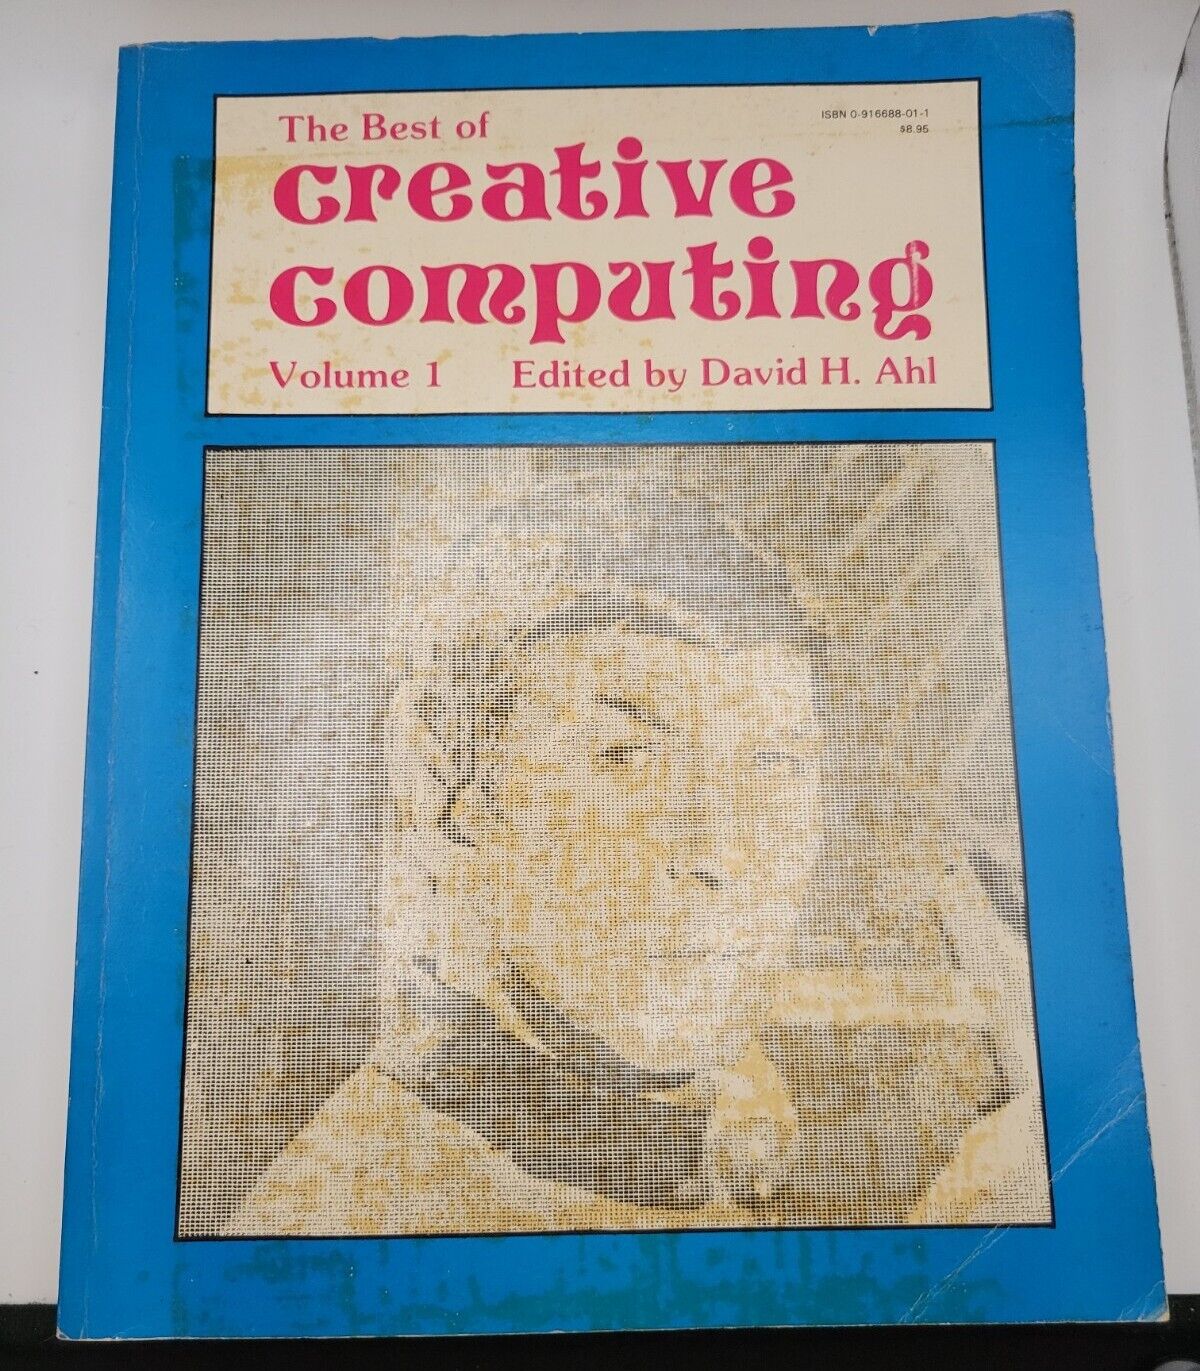 The Best of Creative Computing Volume 1 Paperback David H. Ahl July 1977 2nd Ed